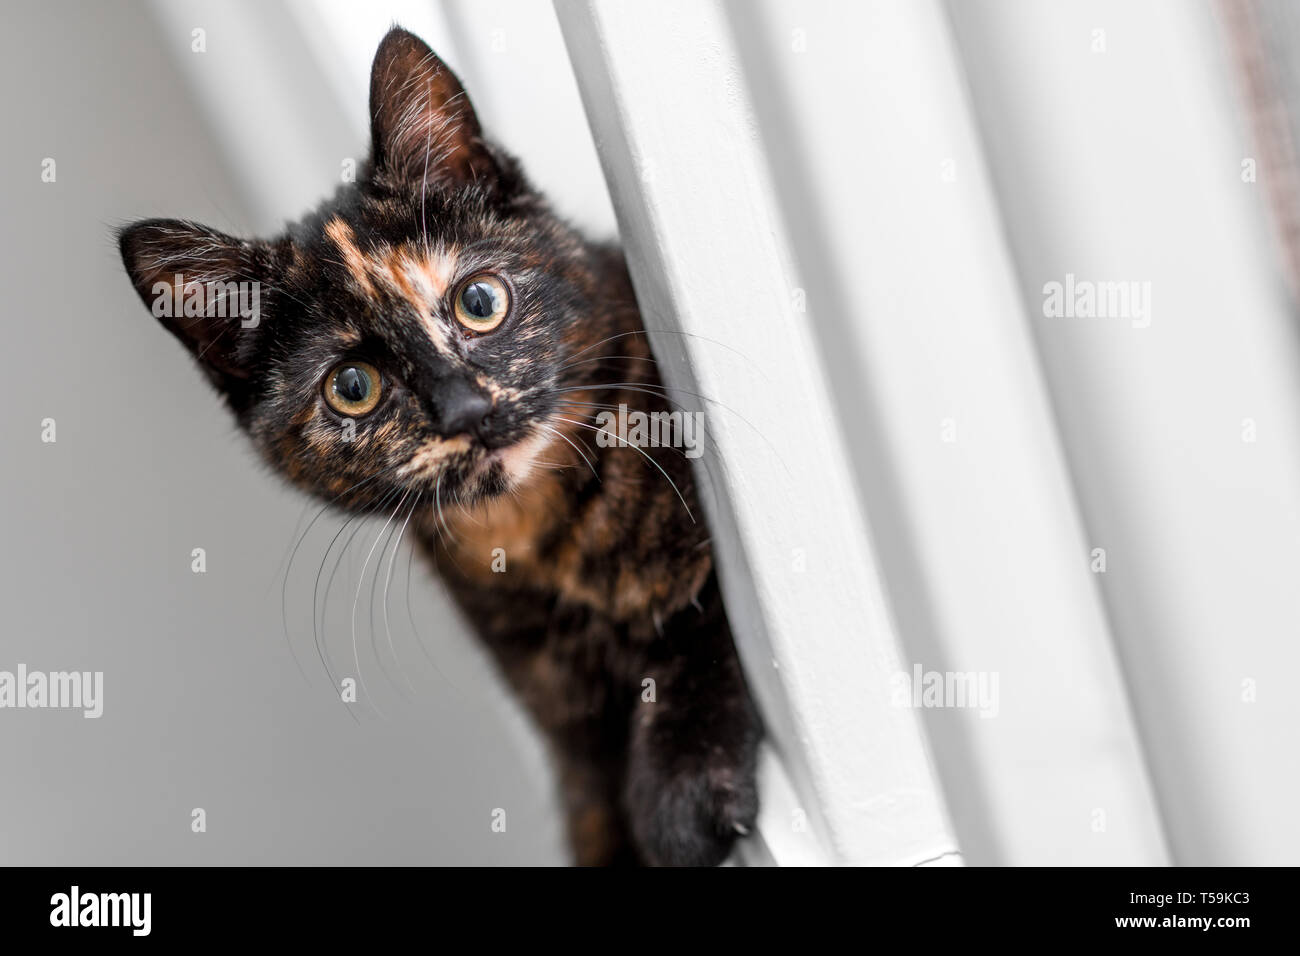 A small young cat / kitten playing and peaking through the rails of a house staircase Stock Photo